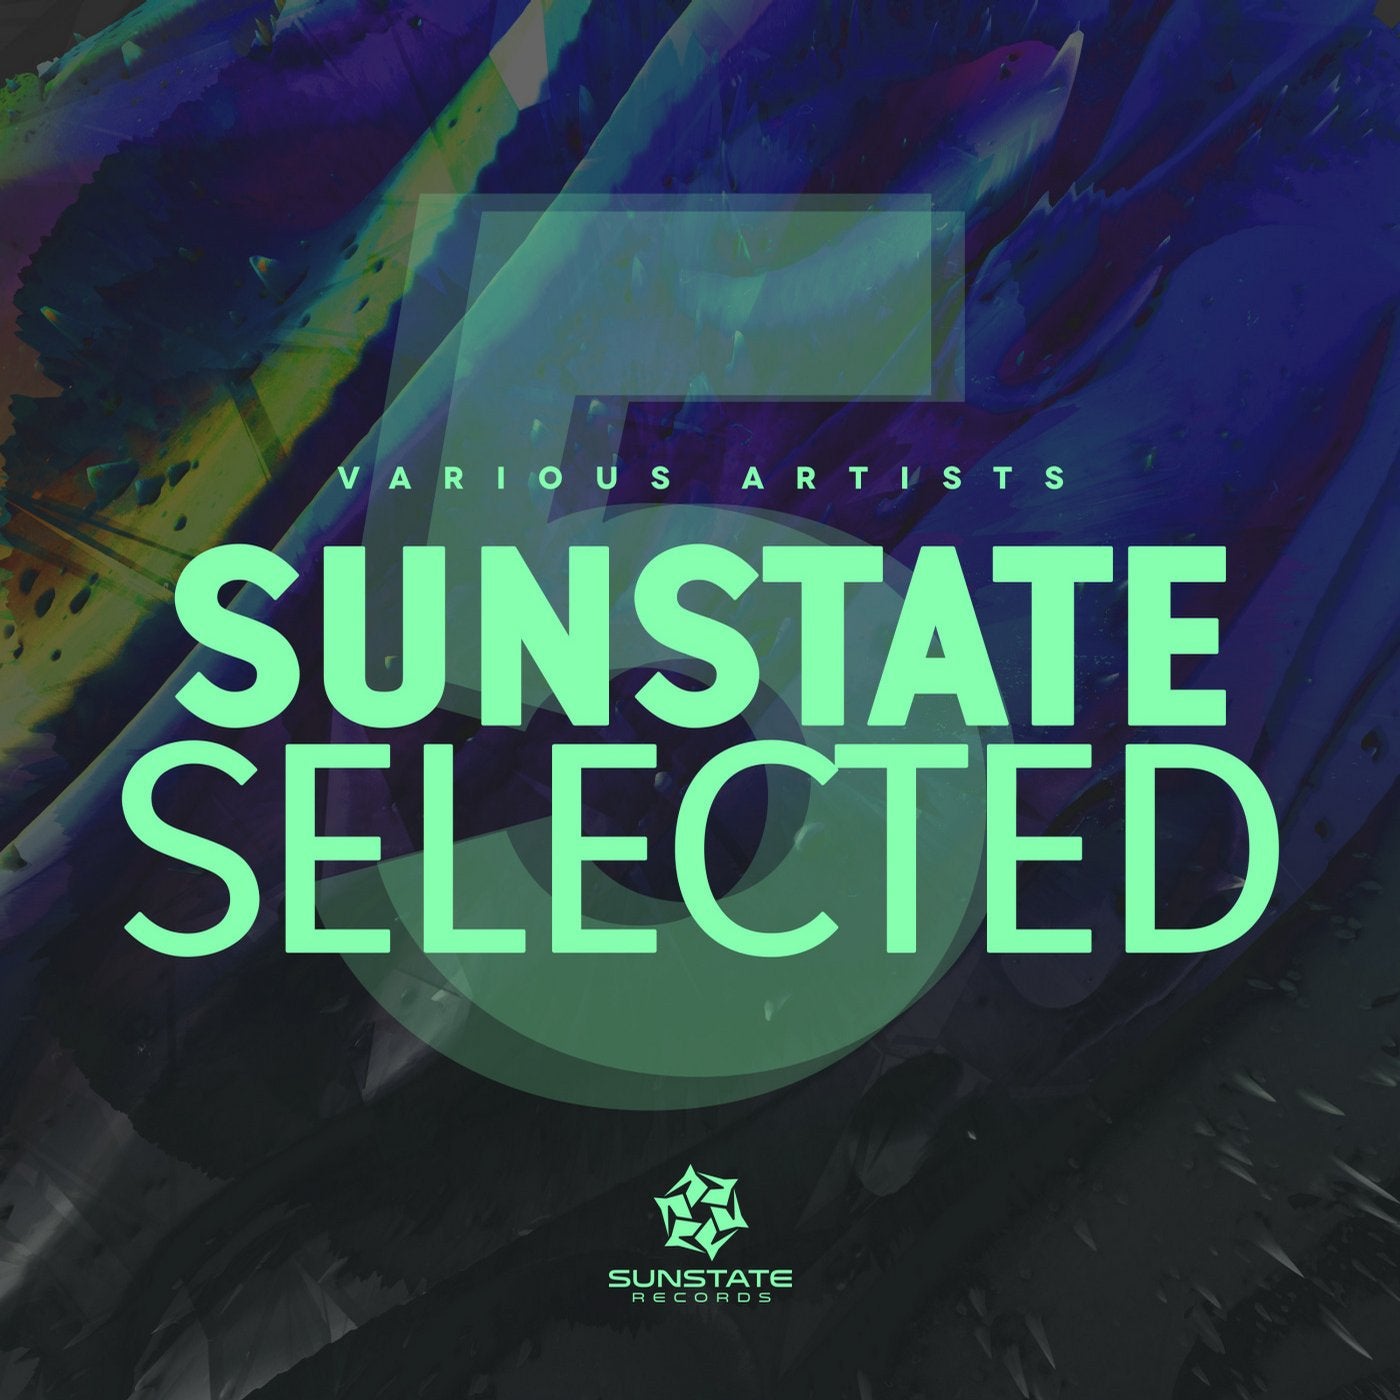 Sunstate Selected, Vol. 5